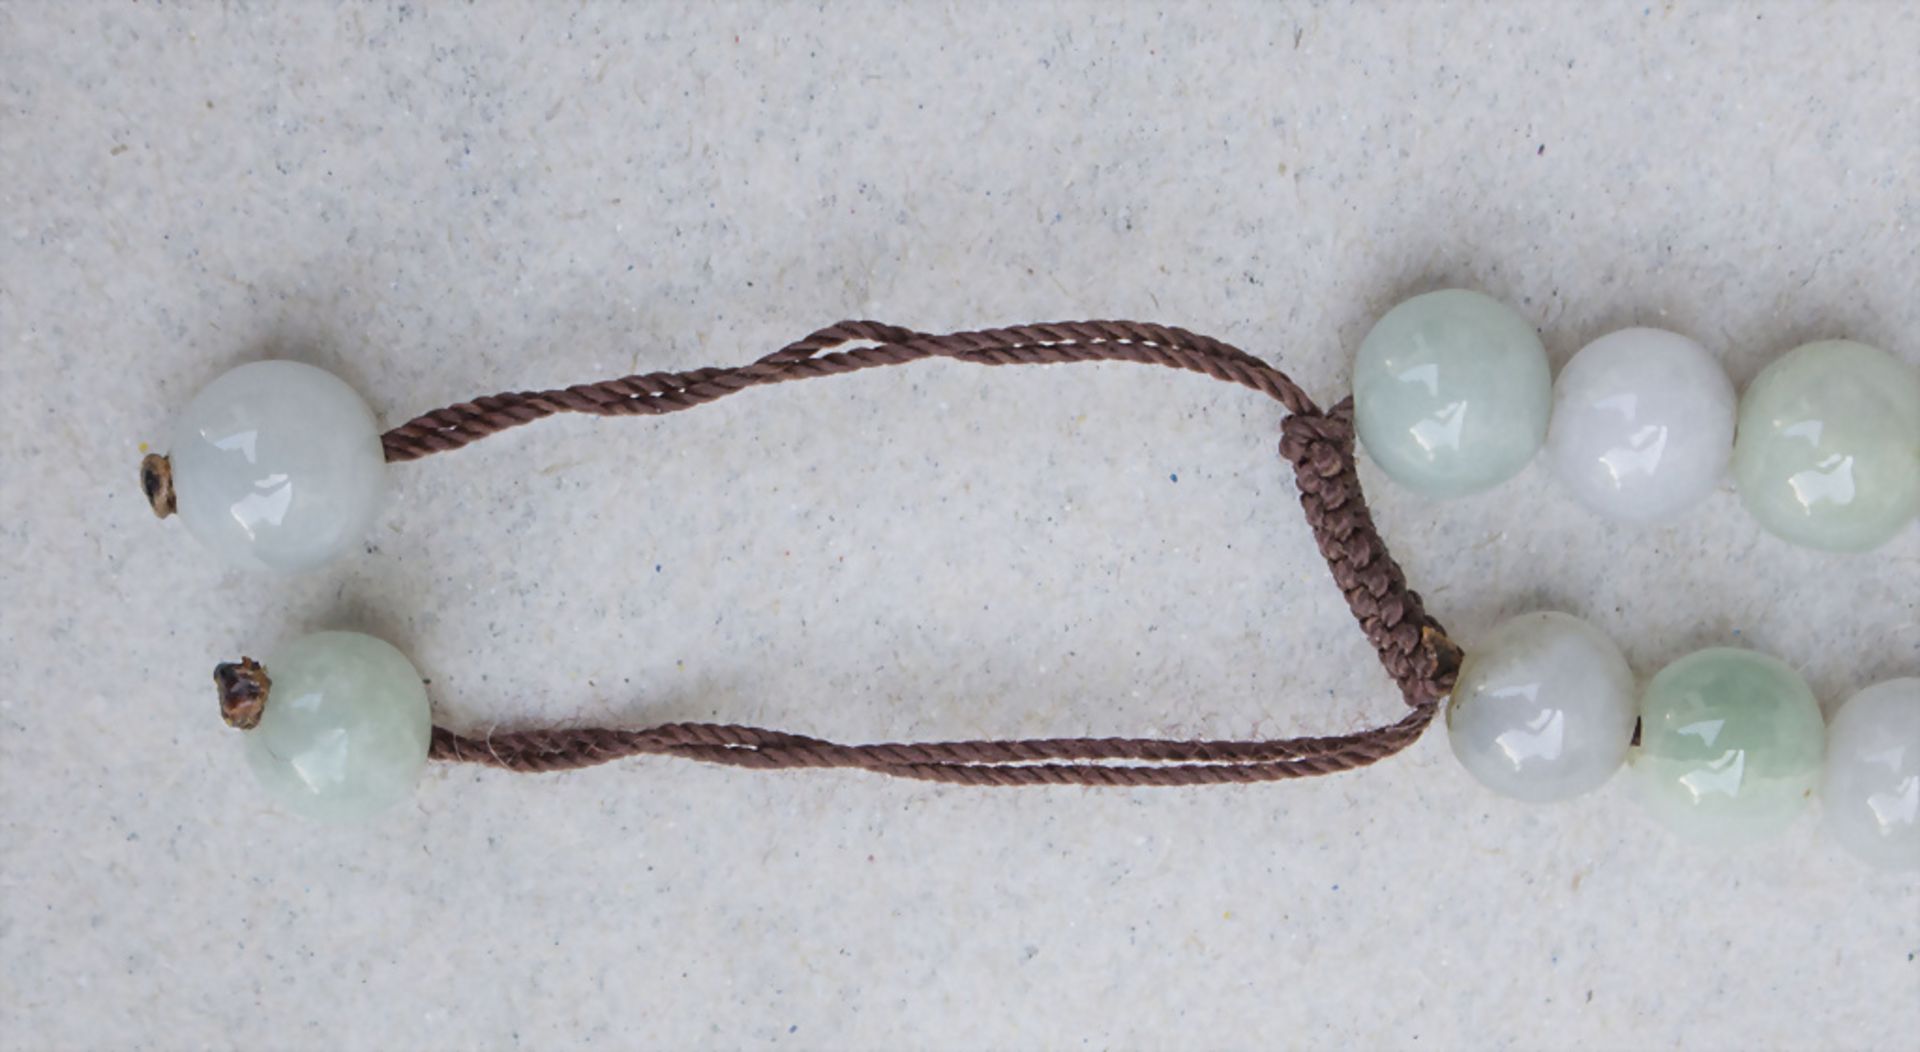 Jadekette mit Glückssymbol / A jade necklace with a lucky symbol, China, Qing-Dynastie (1644-1911) - Image 10 of 10